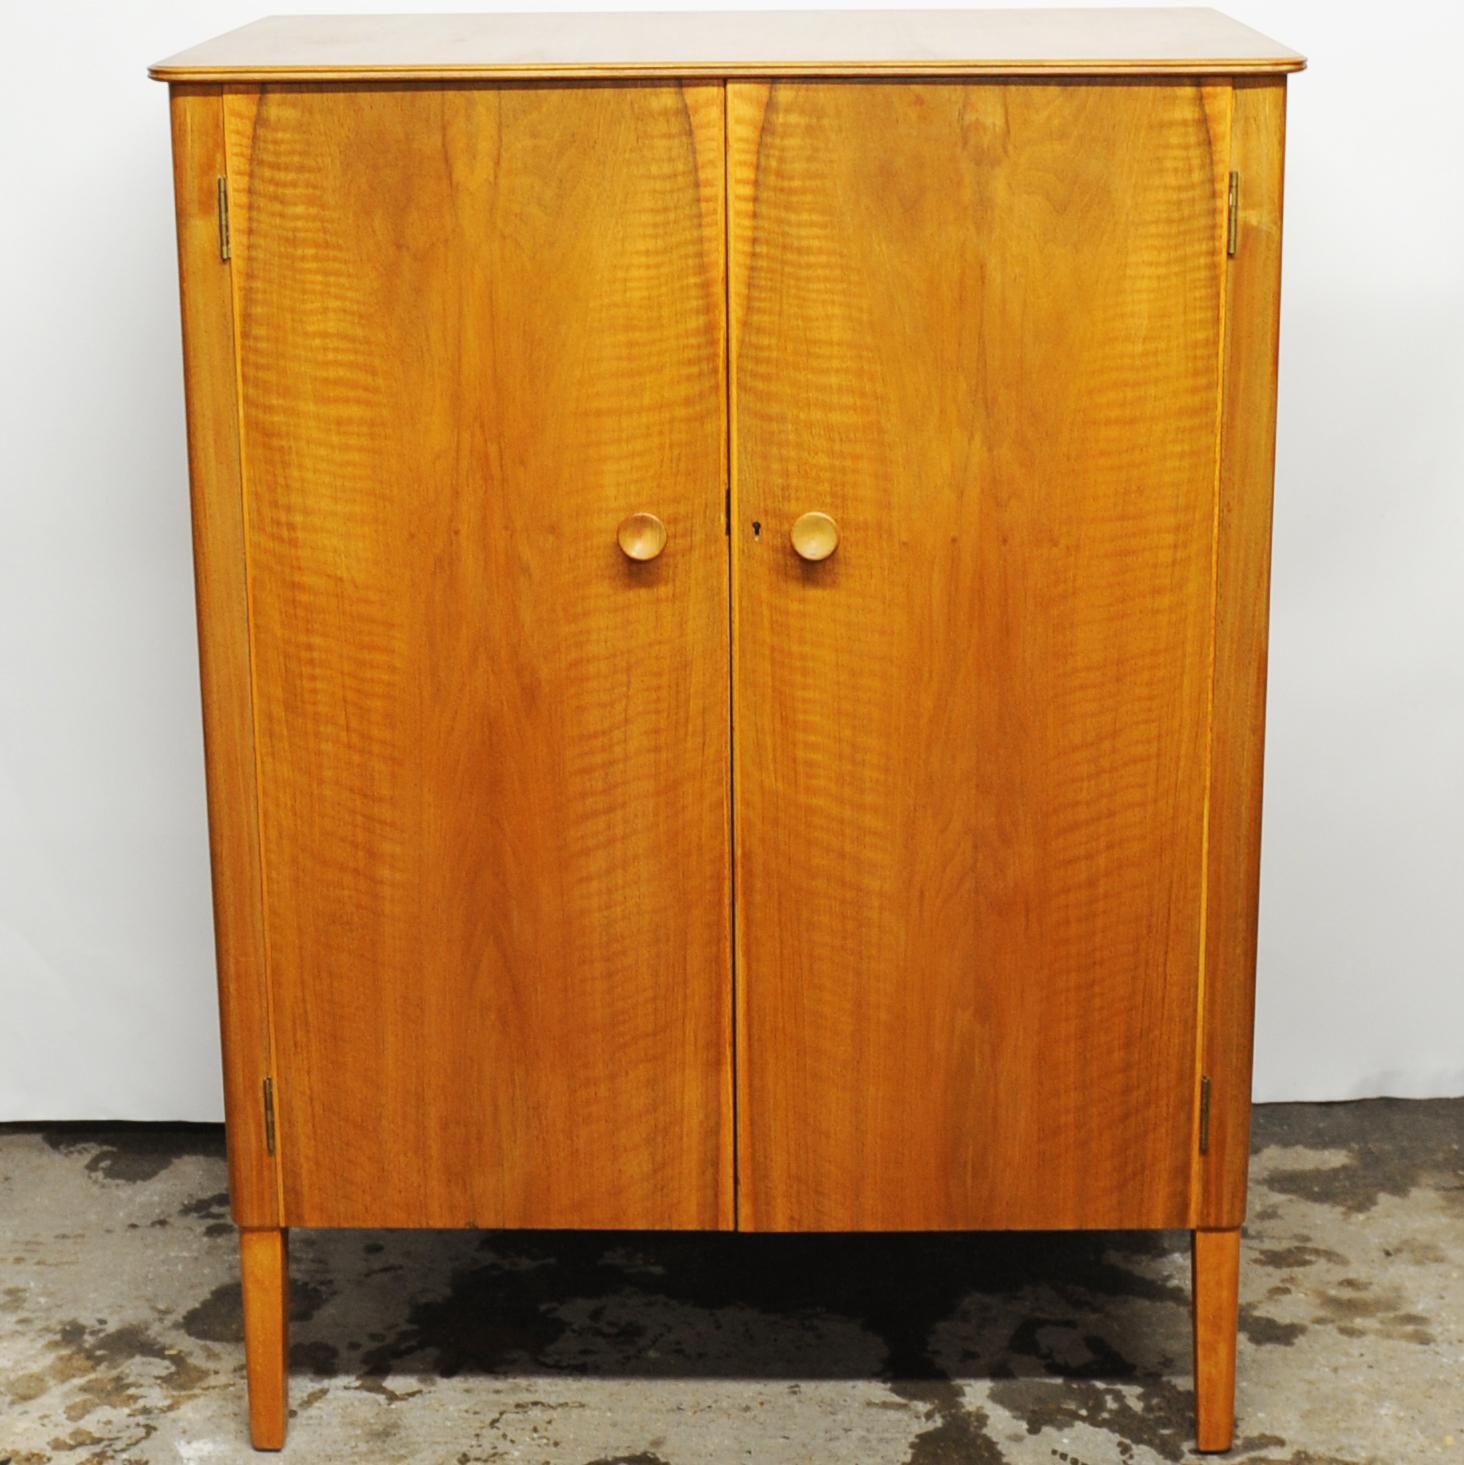 A mid-century modern compact wardrobe made by Gordon Russell. Features a sliding closet rod and built-in shelves.

Manufacturer - Gordon Russell

Design Period - 1960 to 1969

Country of Manufacture - U.K

Style - Mid-Century

Detailed Condition -